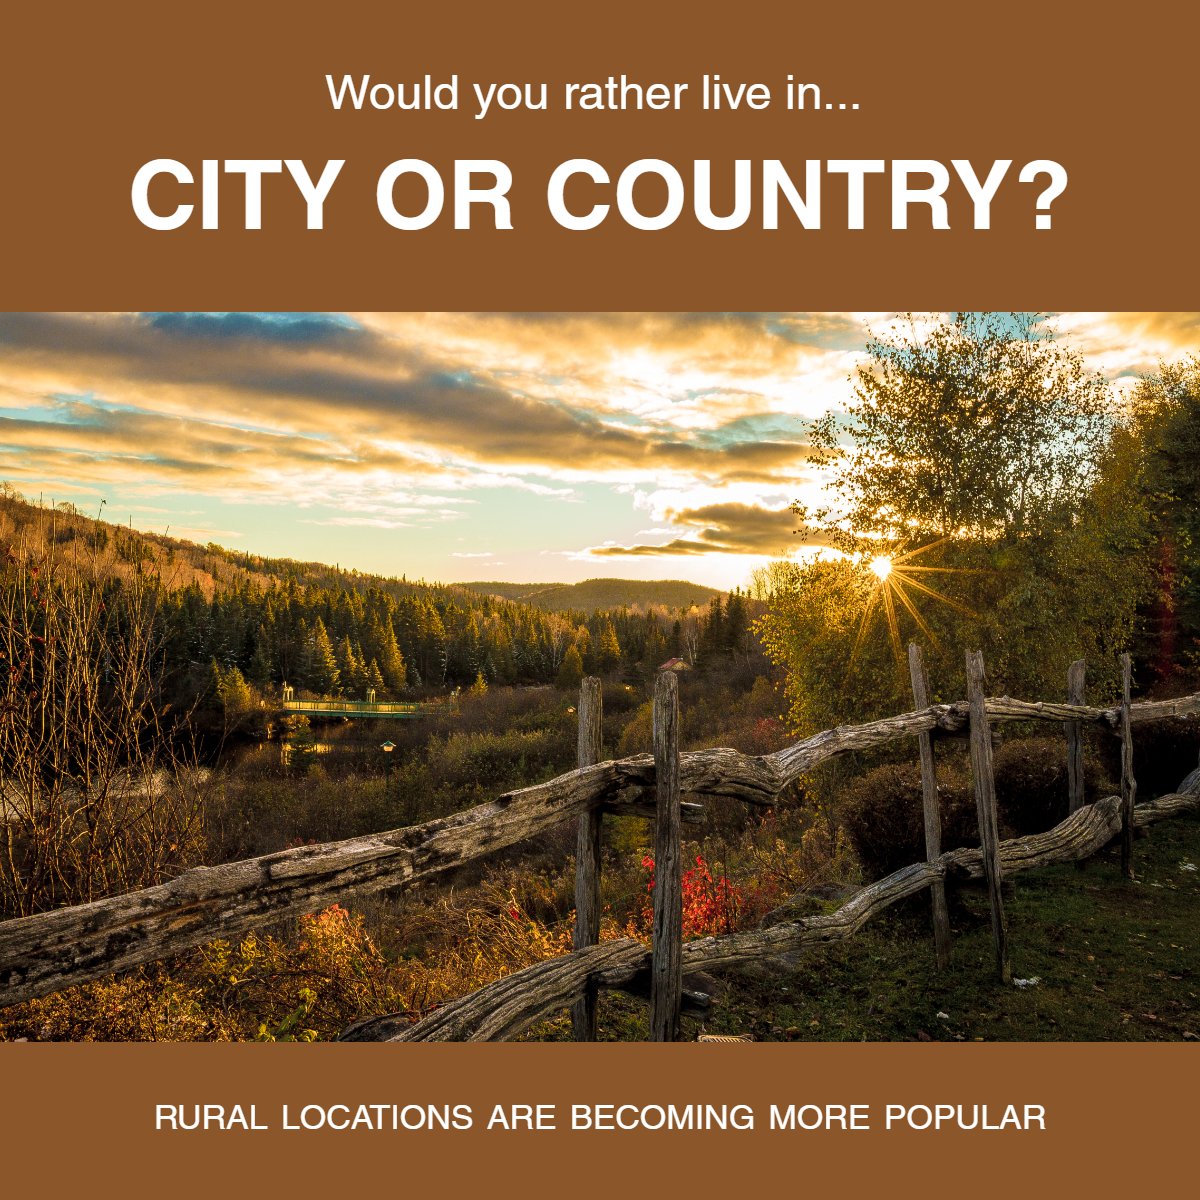 Would you rather live in the city or country? 🏙️🌄

#wouldyourather  #cityorcountry  #citylights  #realestatequestion  #realestate
#callniecie